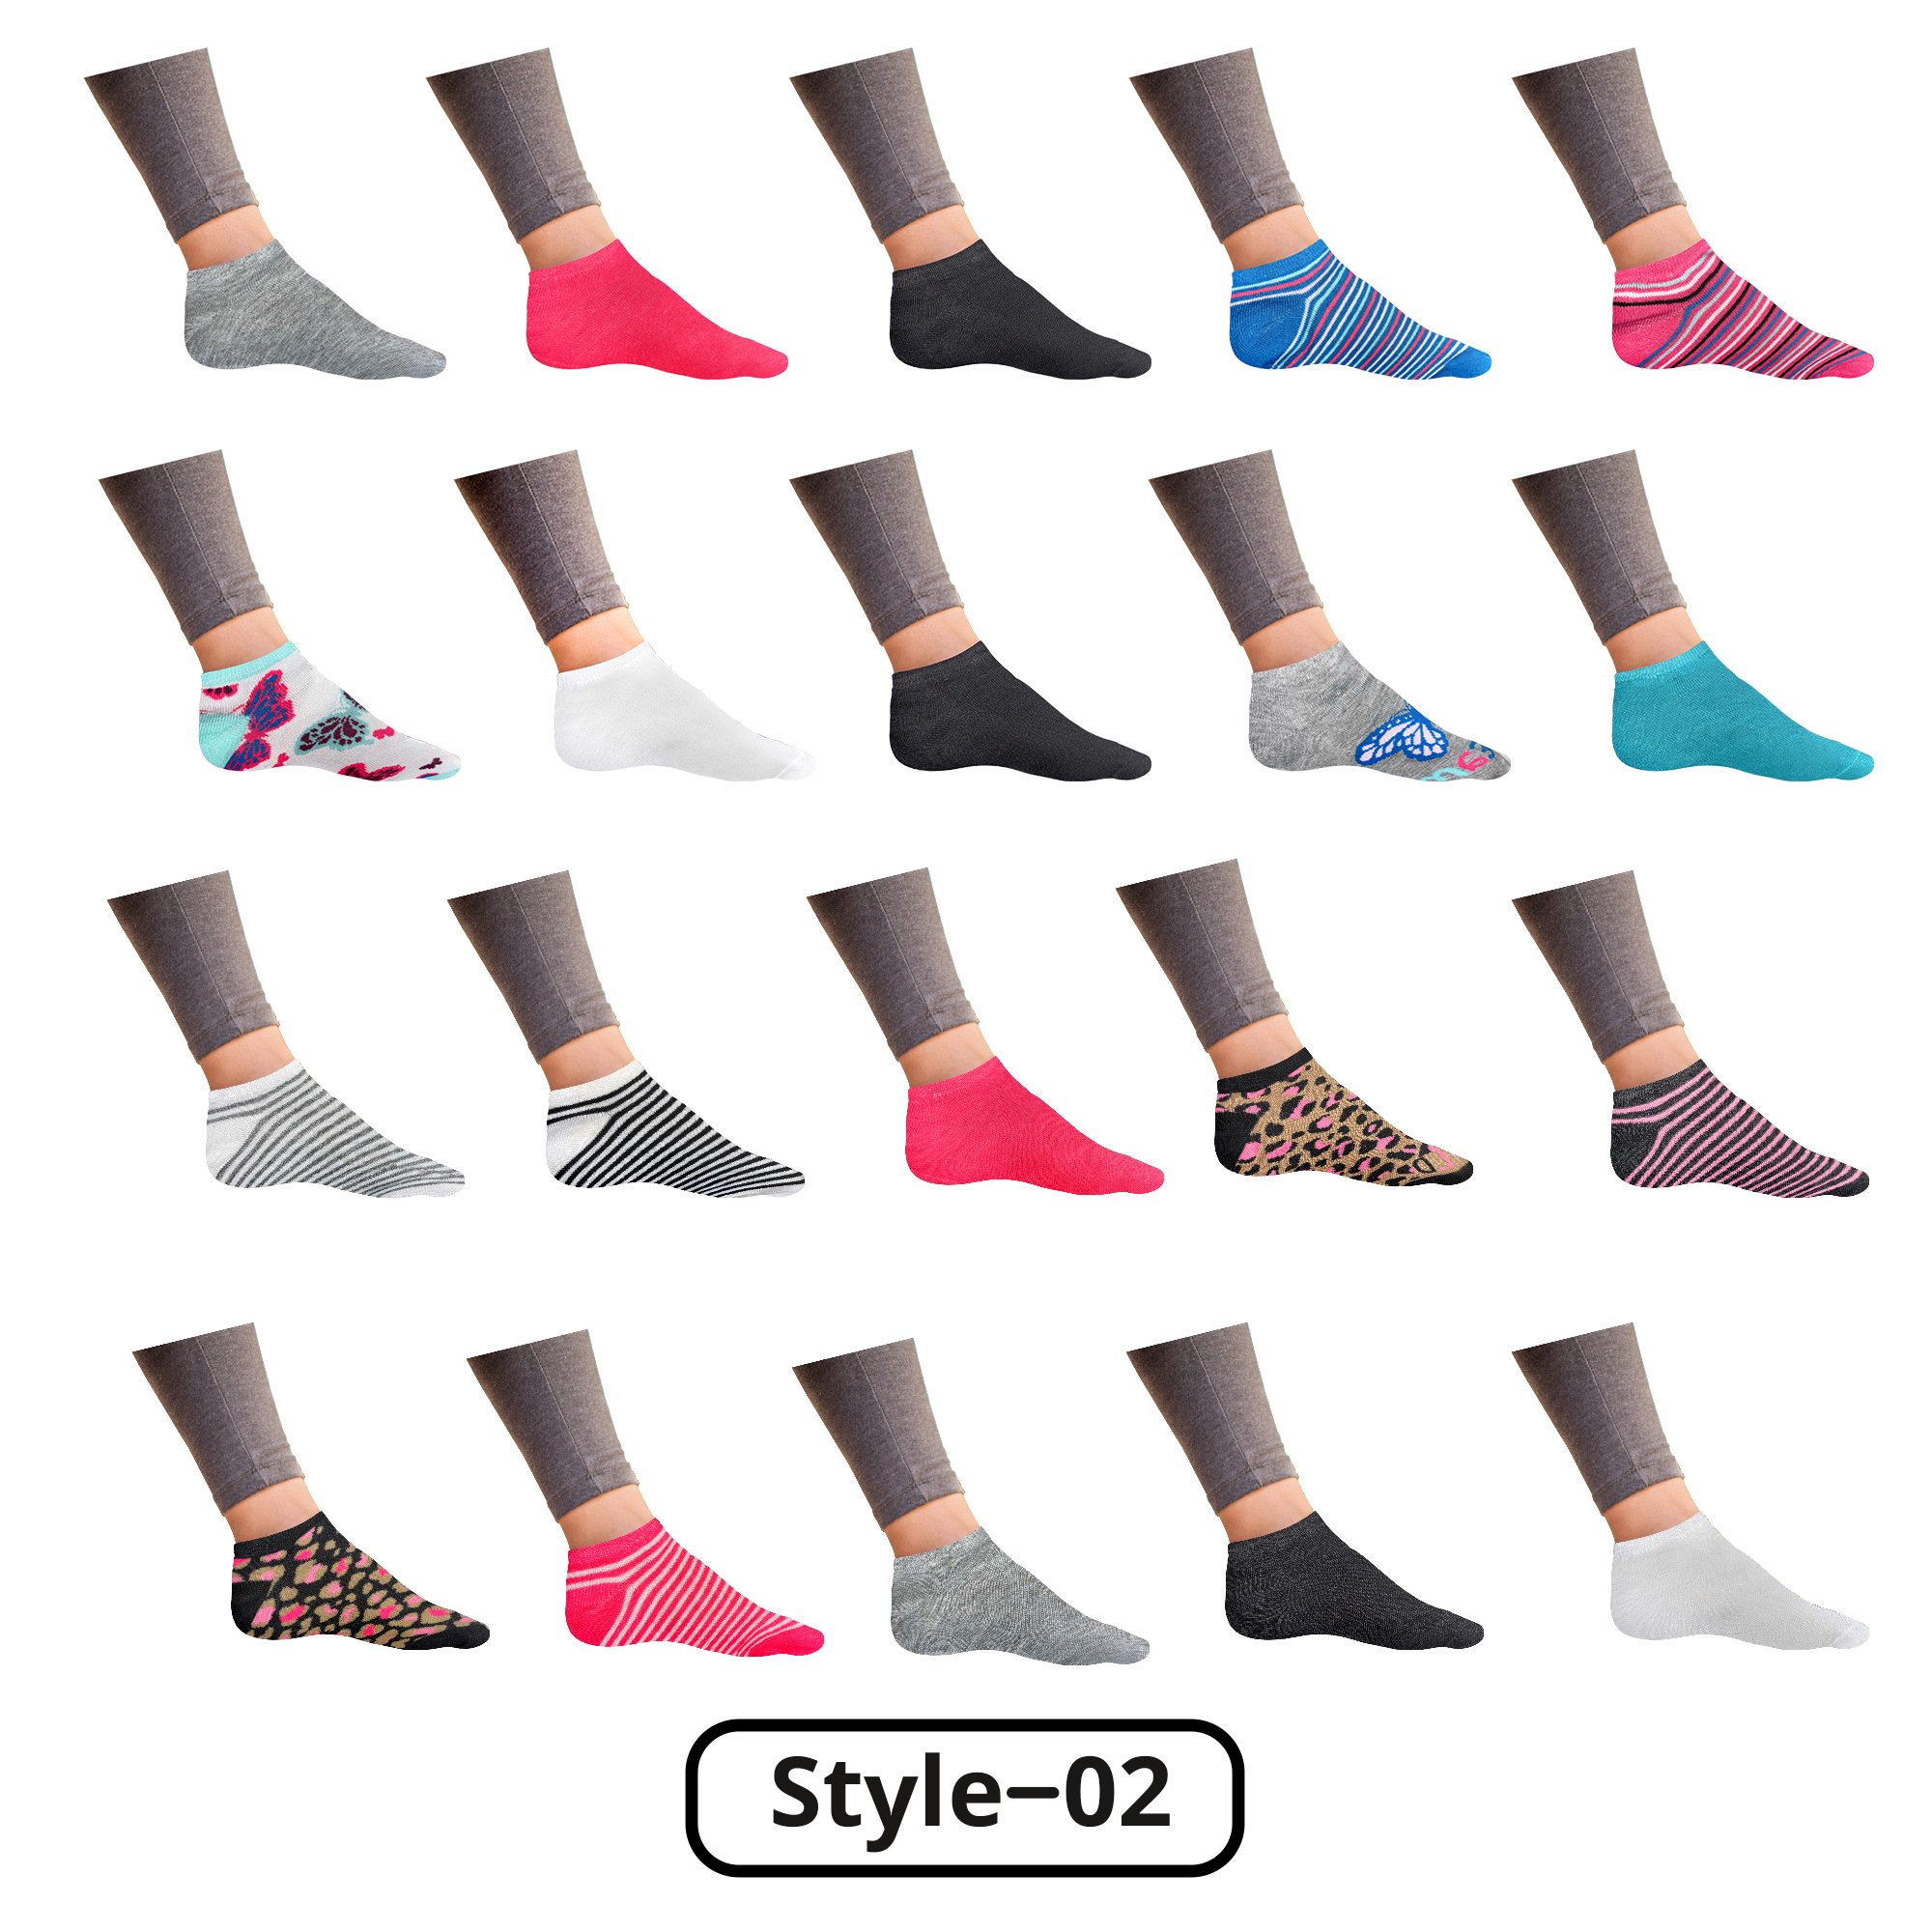 20-Pairs: Women’s Breathable Stylish Colorful Fun No Show Low Cut Ankle Socks - Style 7